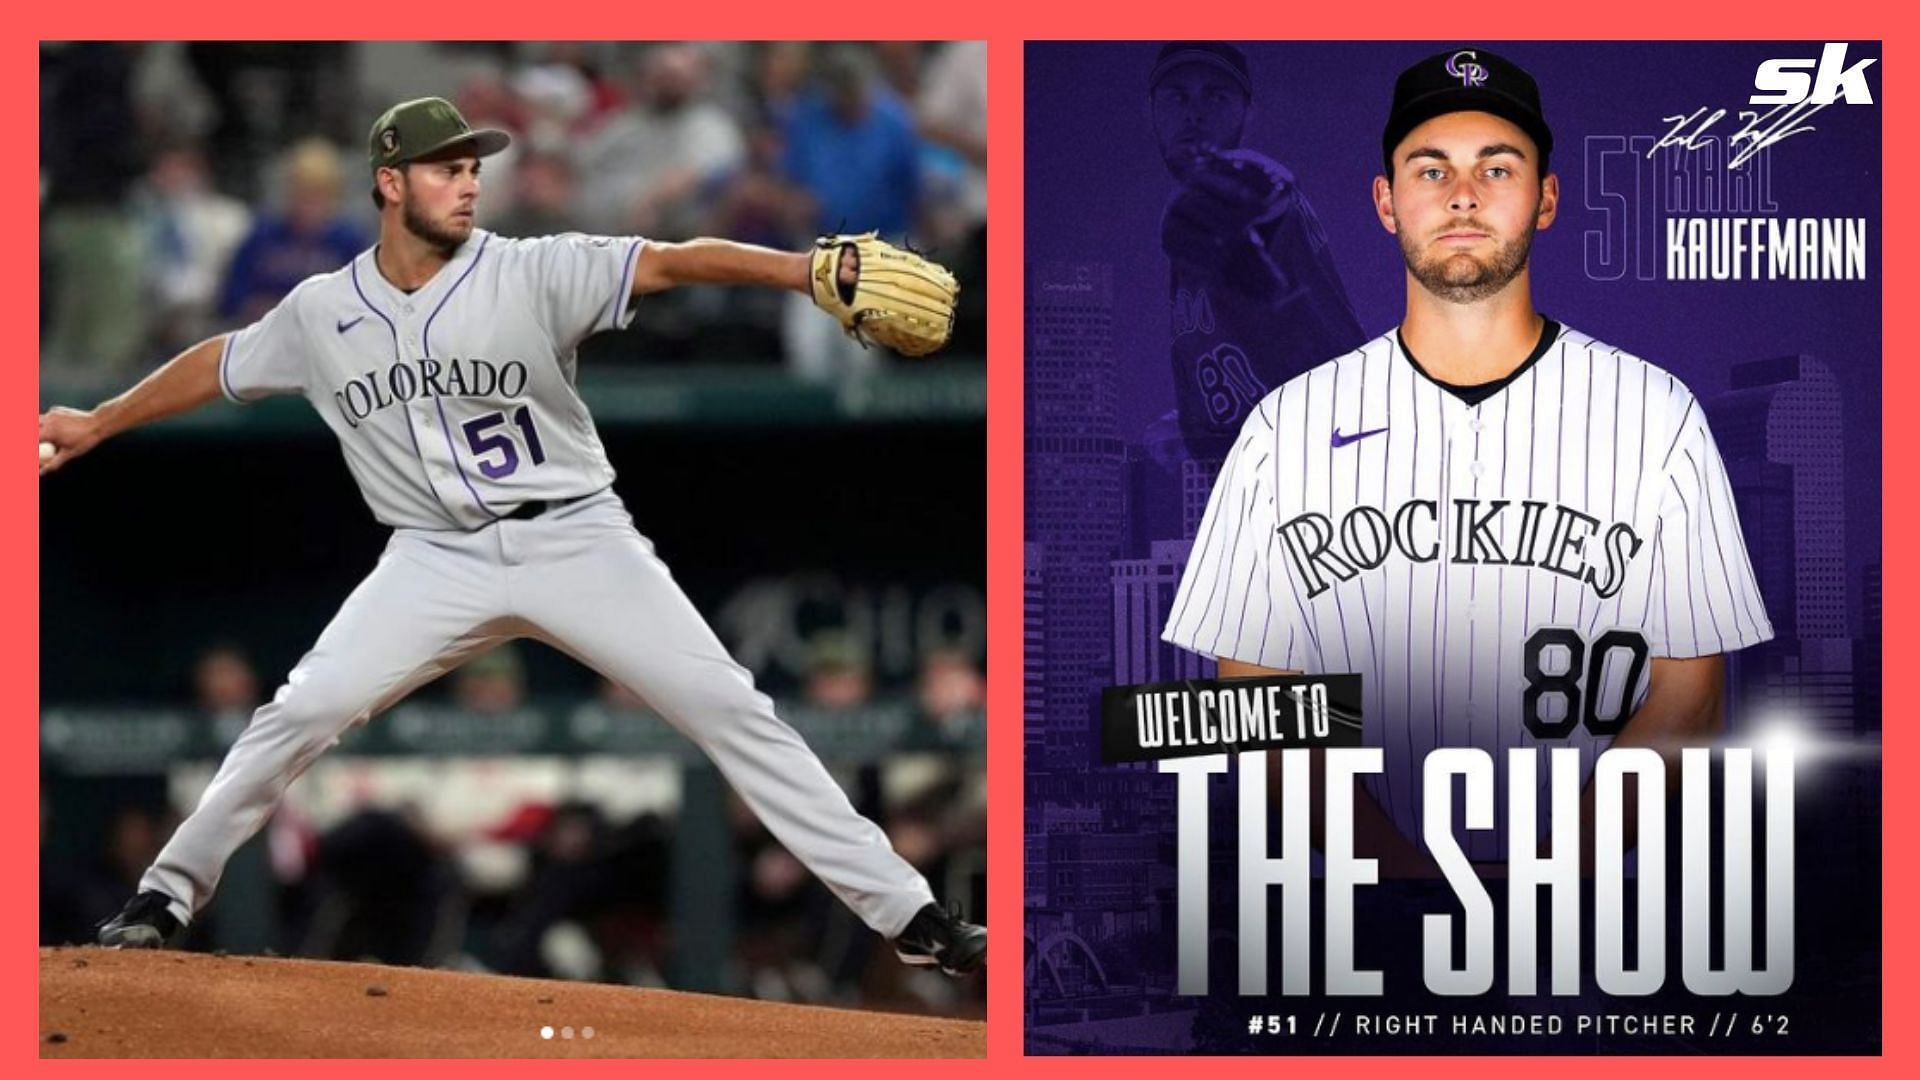 MLB on X: A fit perfect for Colorado. The @Rockies City Connect